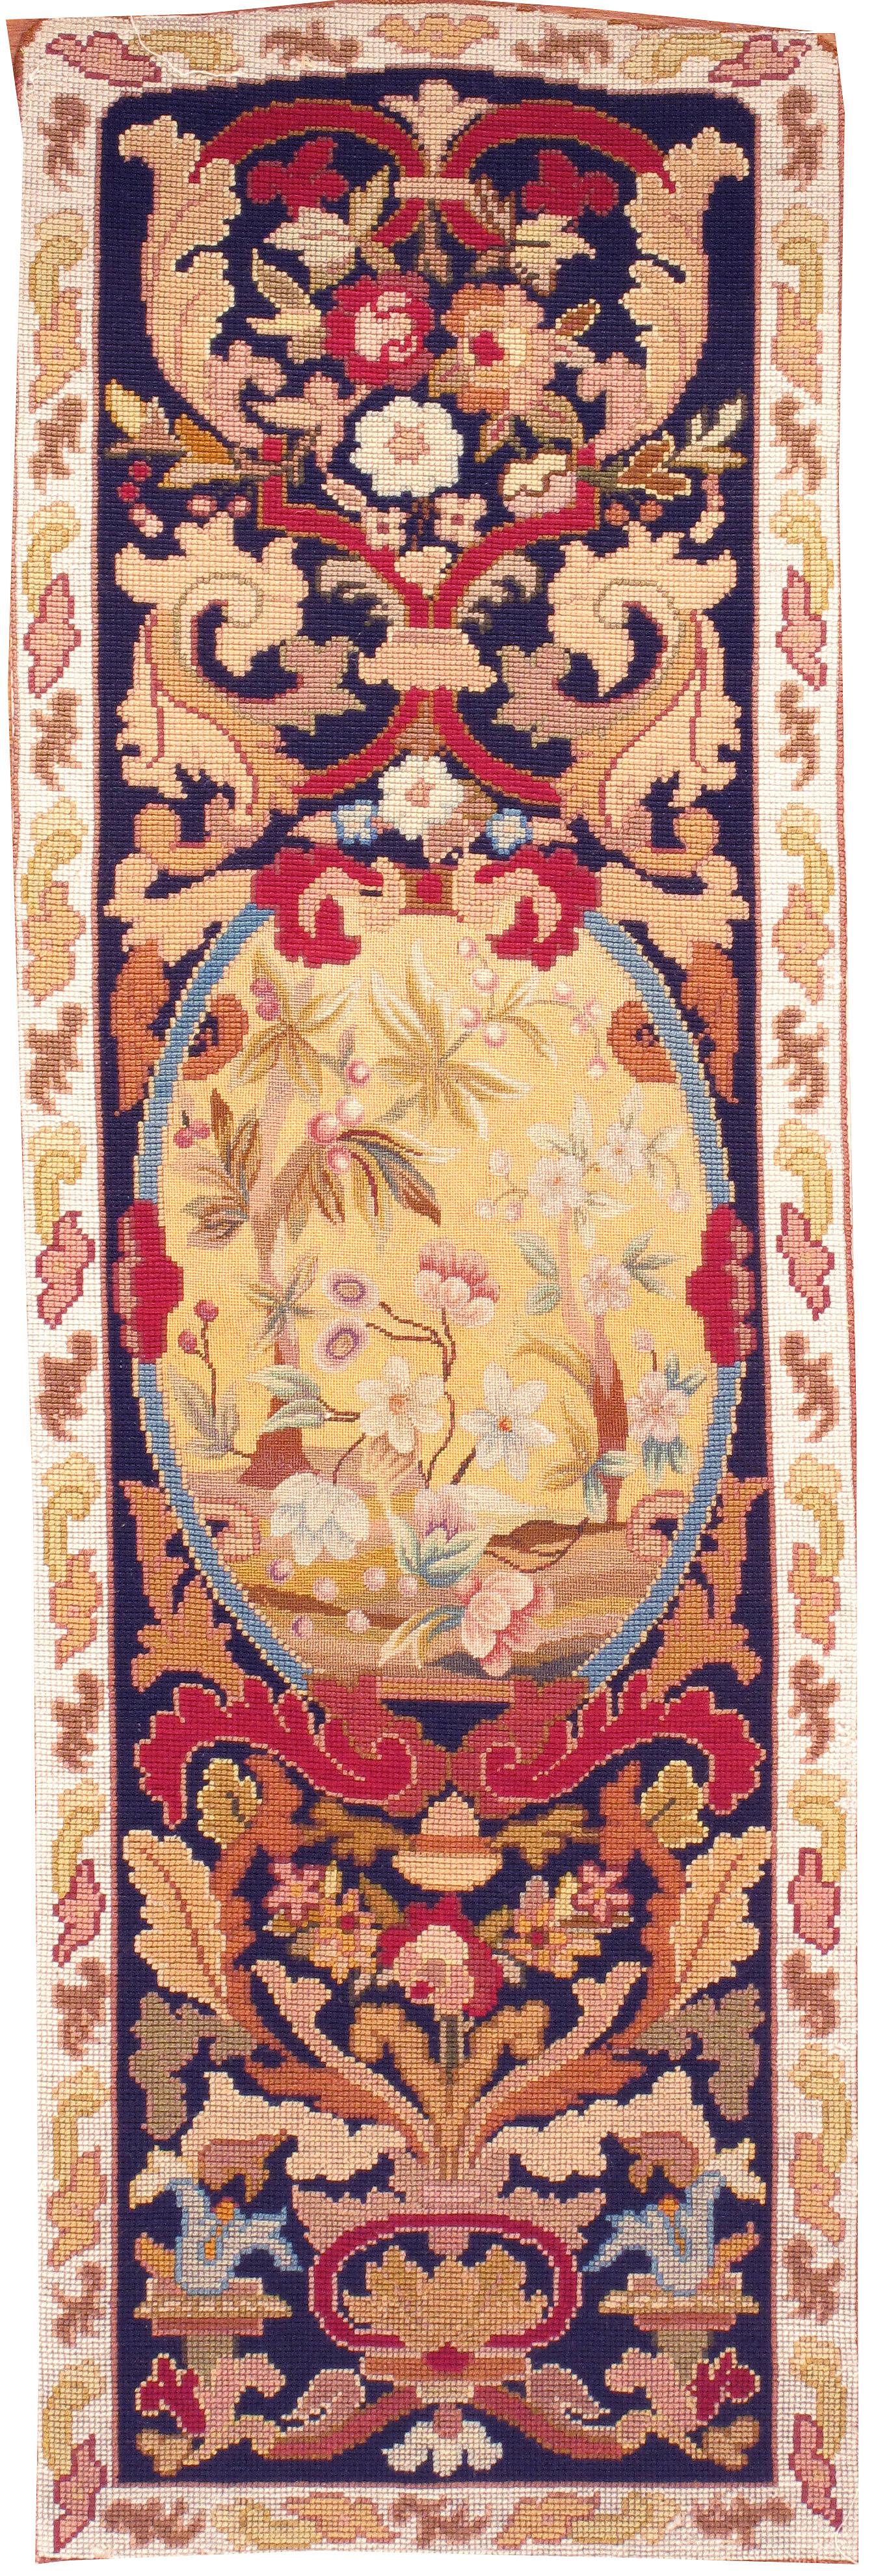 Hand-Woven Set of Five Antique French Needlepoint Panels, circa 1880  1'3 X 3'10 For Sale